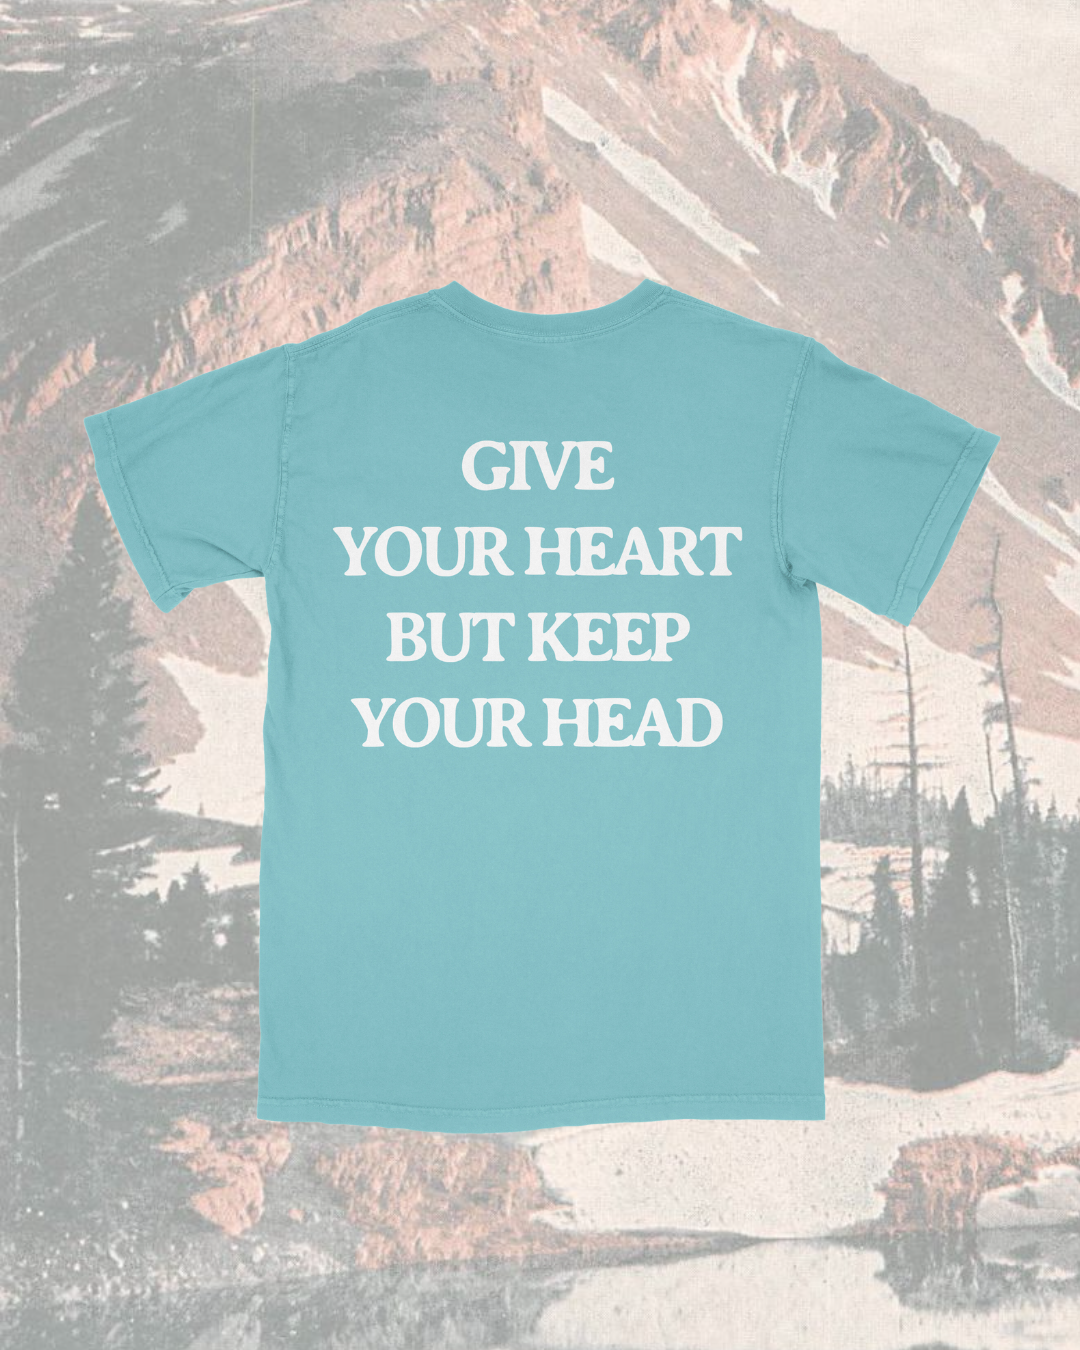 Give Your Heart But Keep Your Head Garment Tee